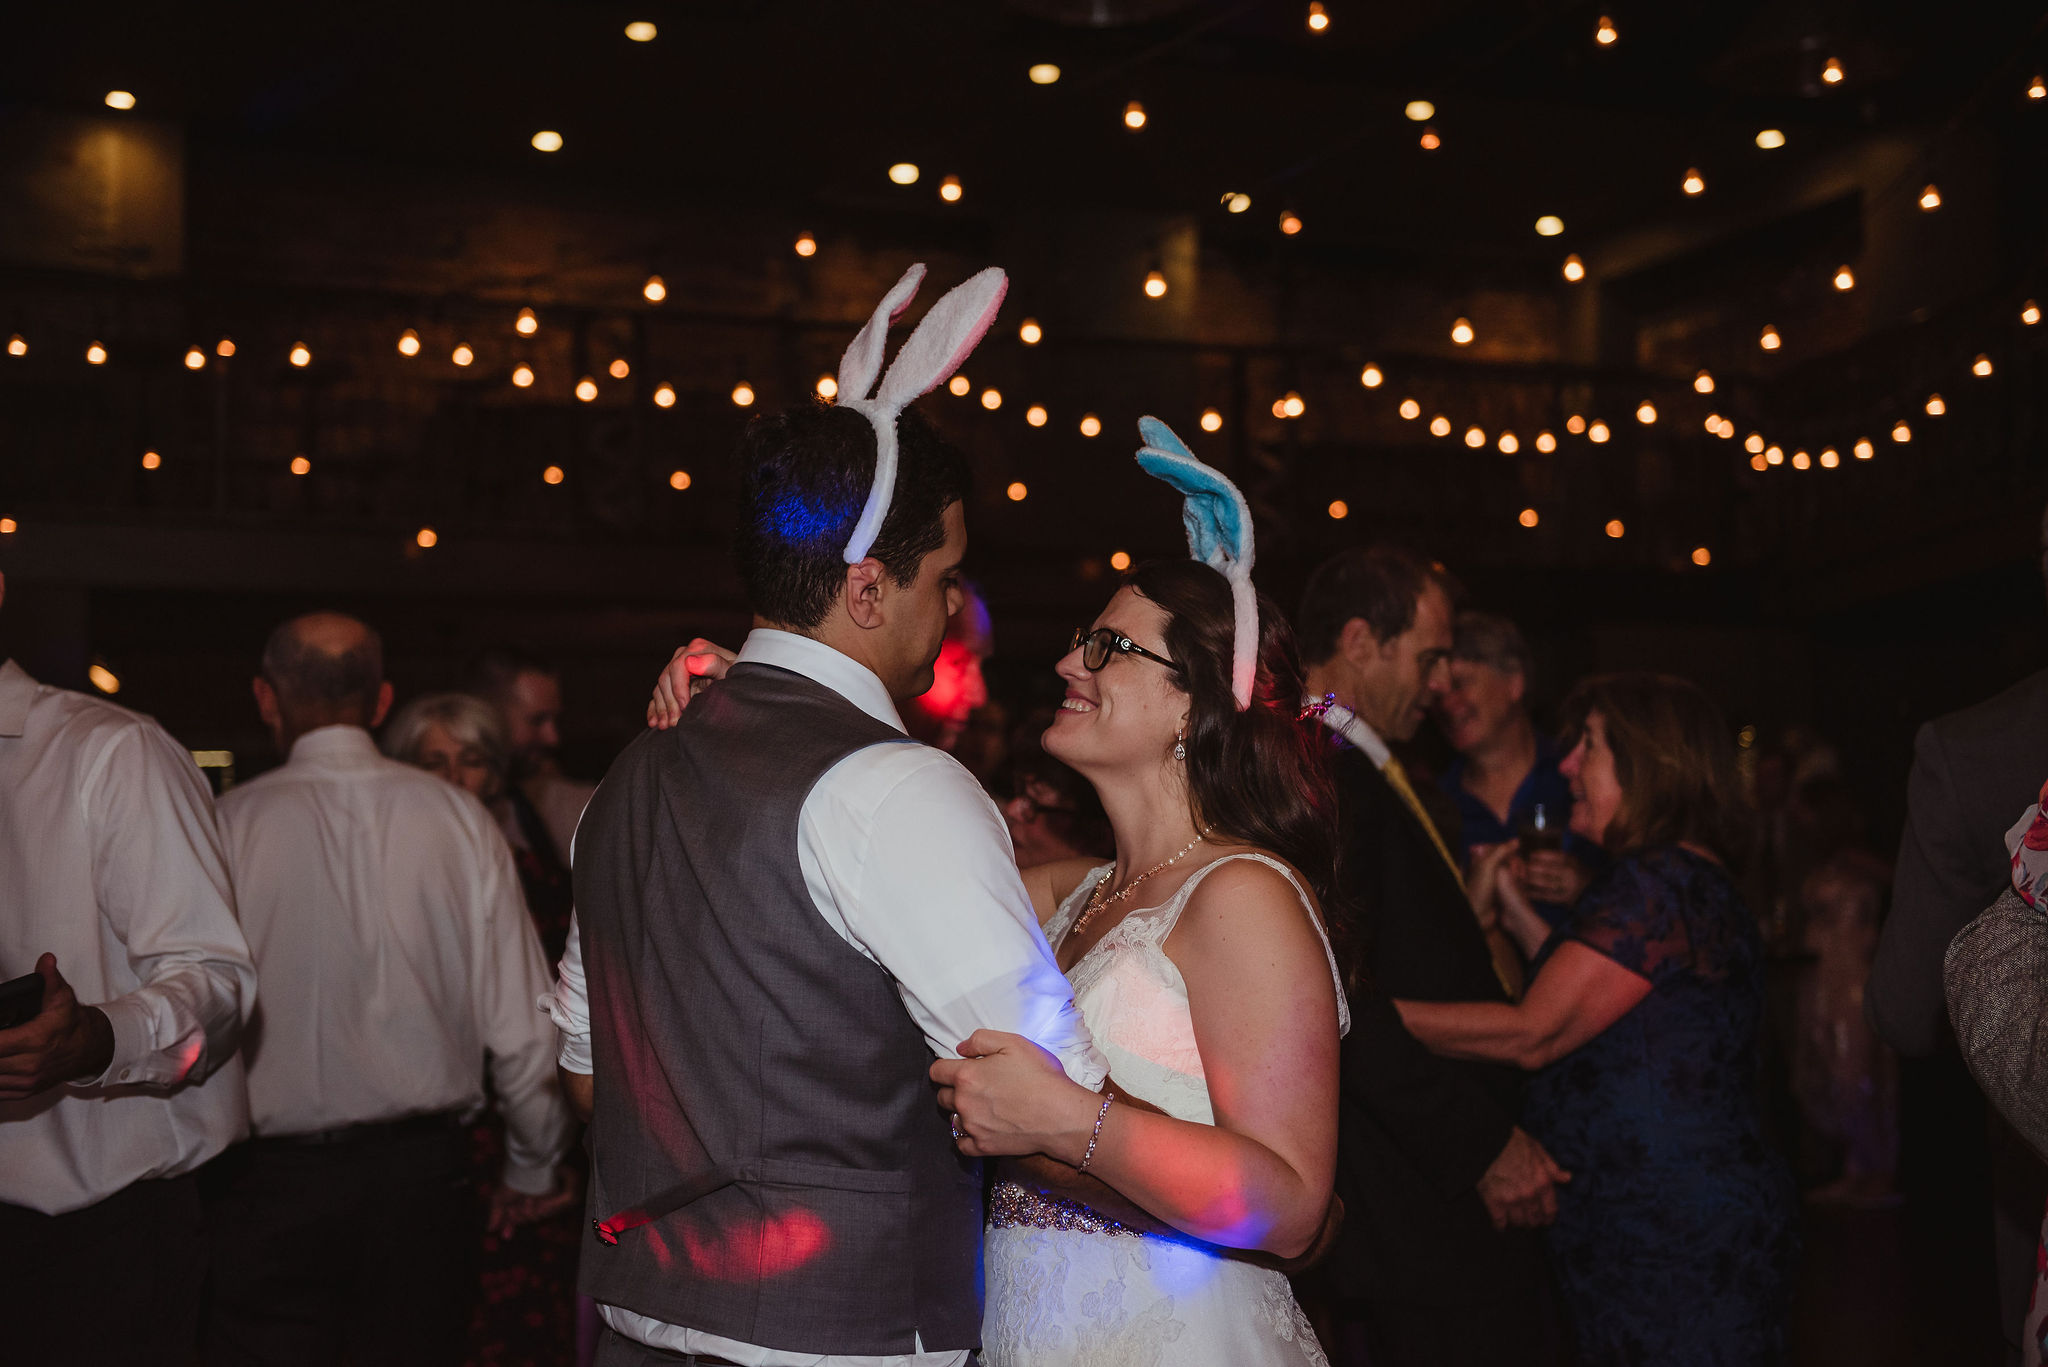 A groom and bride dance under market lights. They are wearing bunny ears.